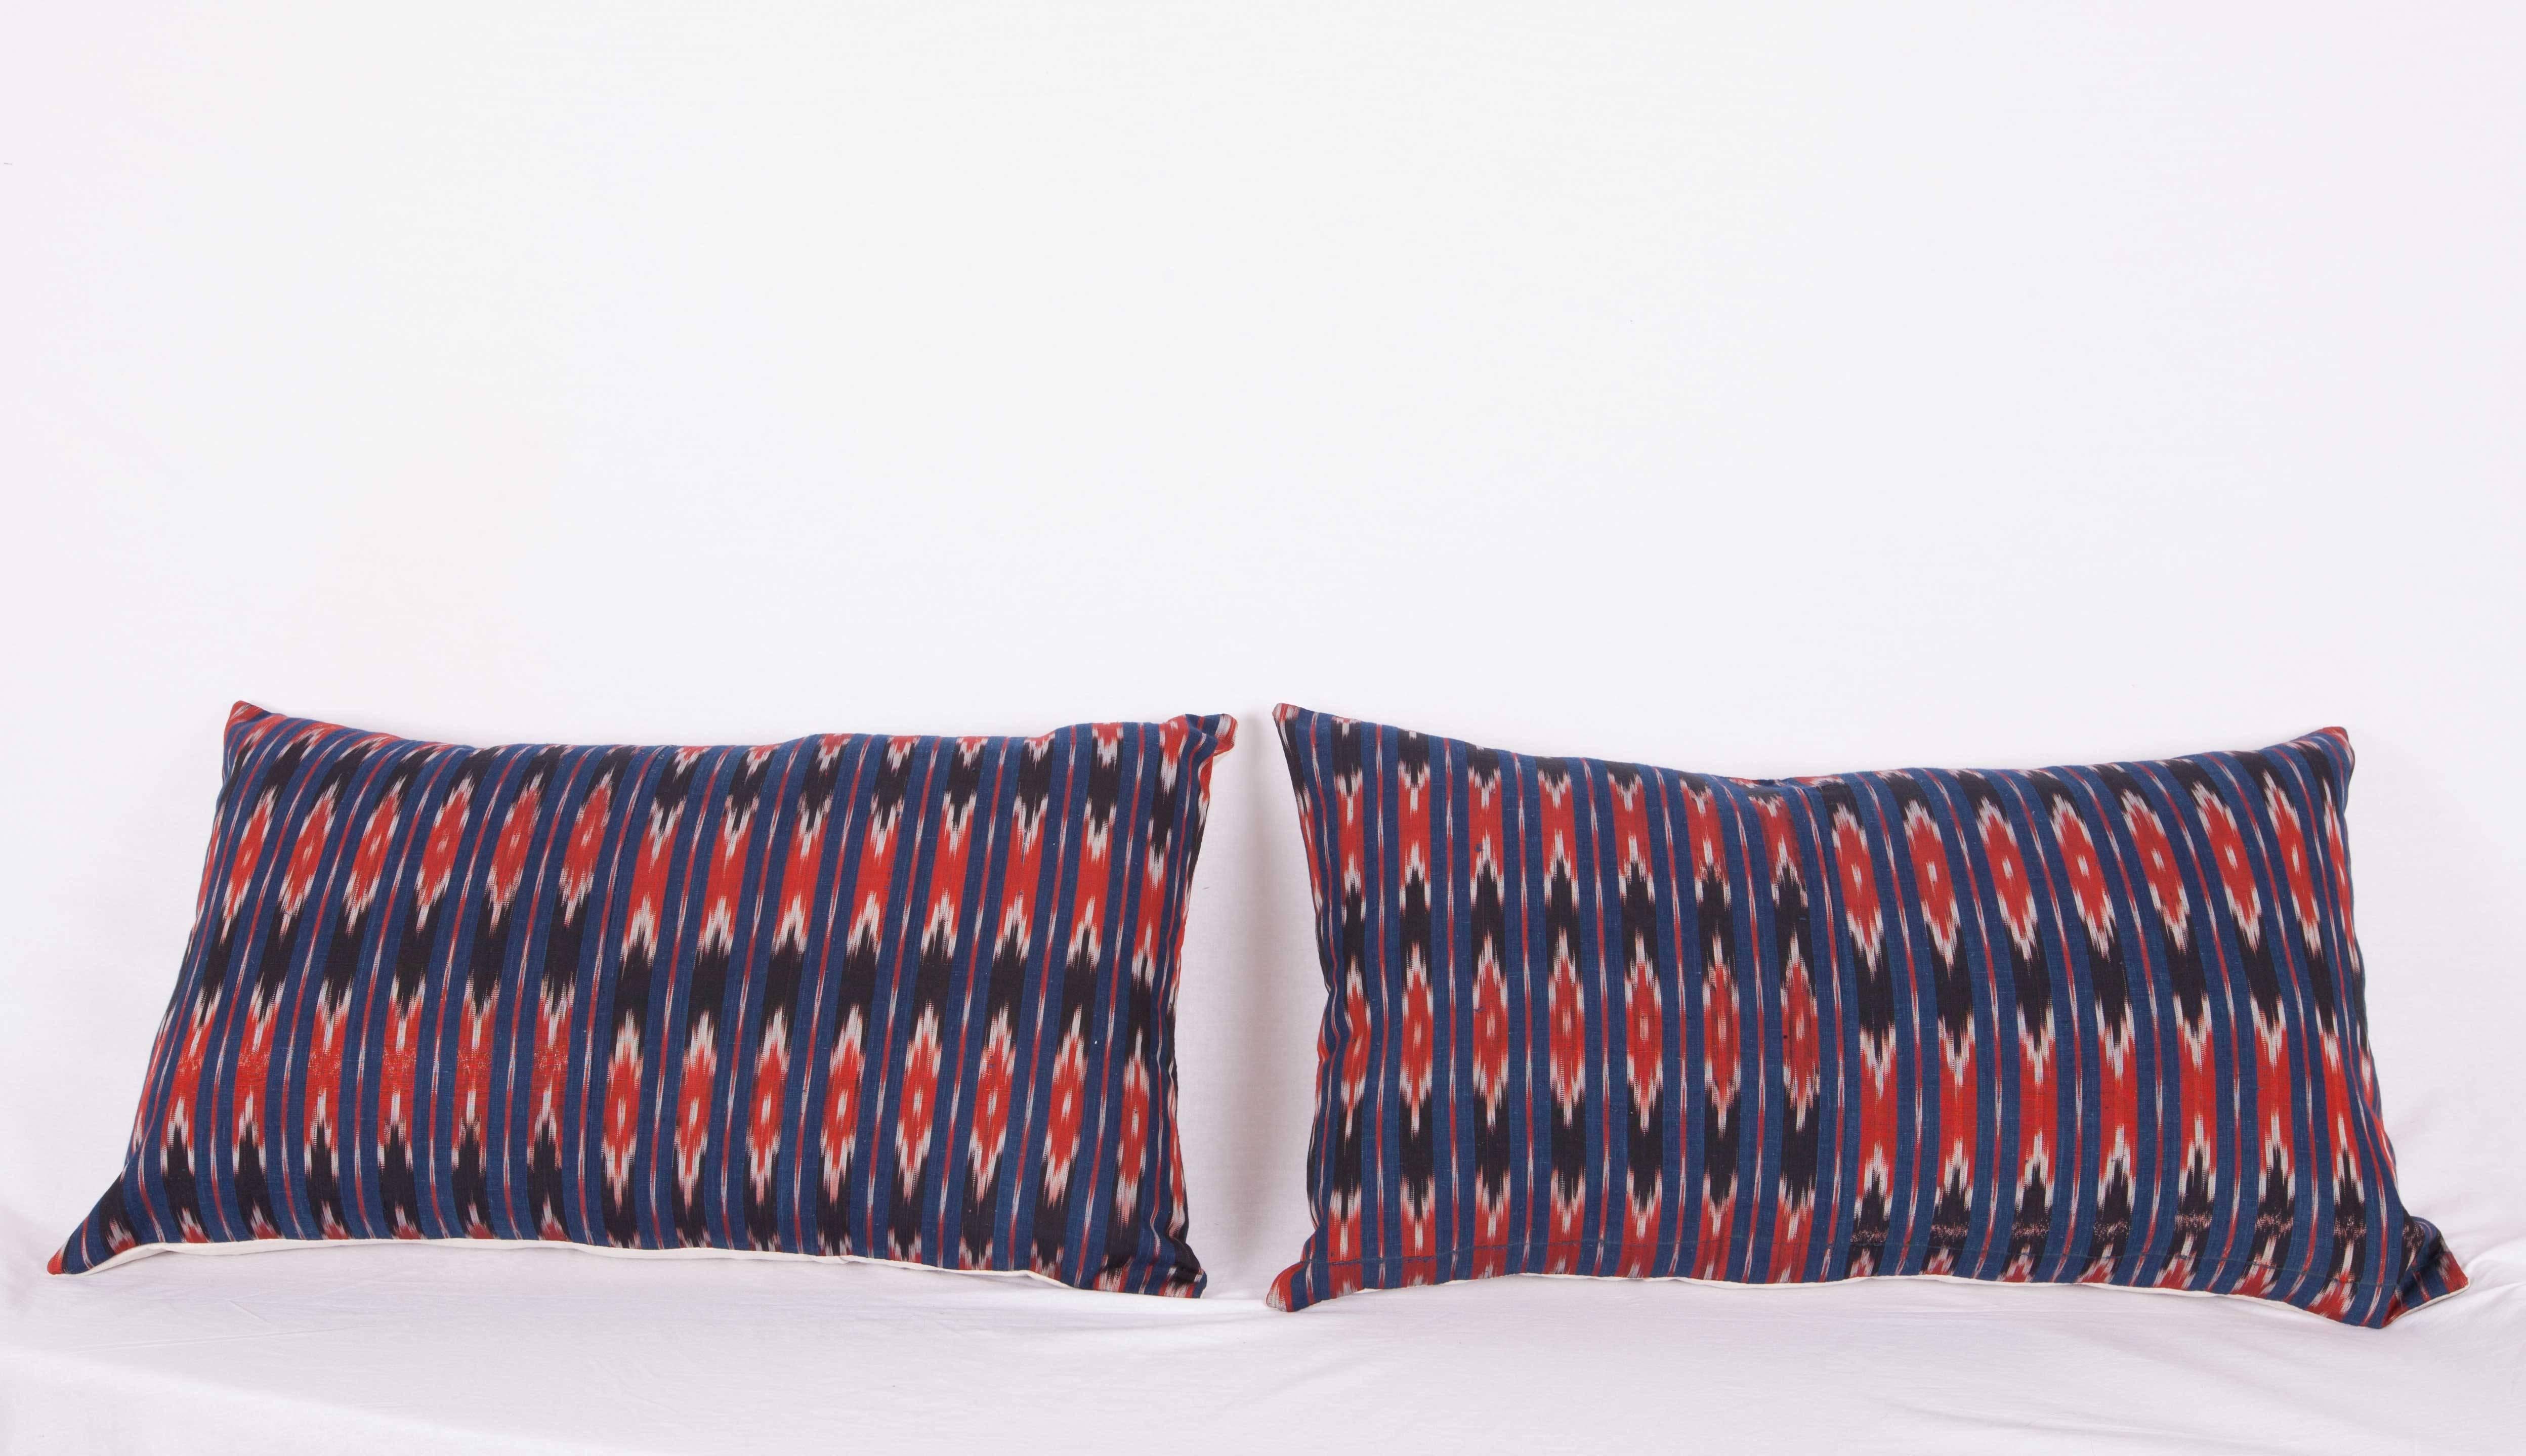 The pillows are made out of old Ikat panel probably from Syria. They do not come with an insert but they come with a bag made to the size and out of cotton to accommodate the filling. The backing is made of linen. Please note filling is not